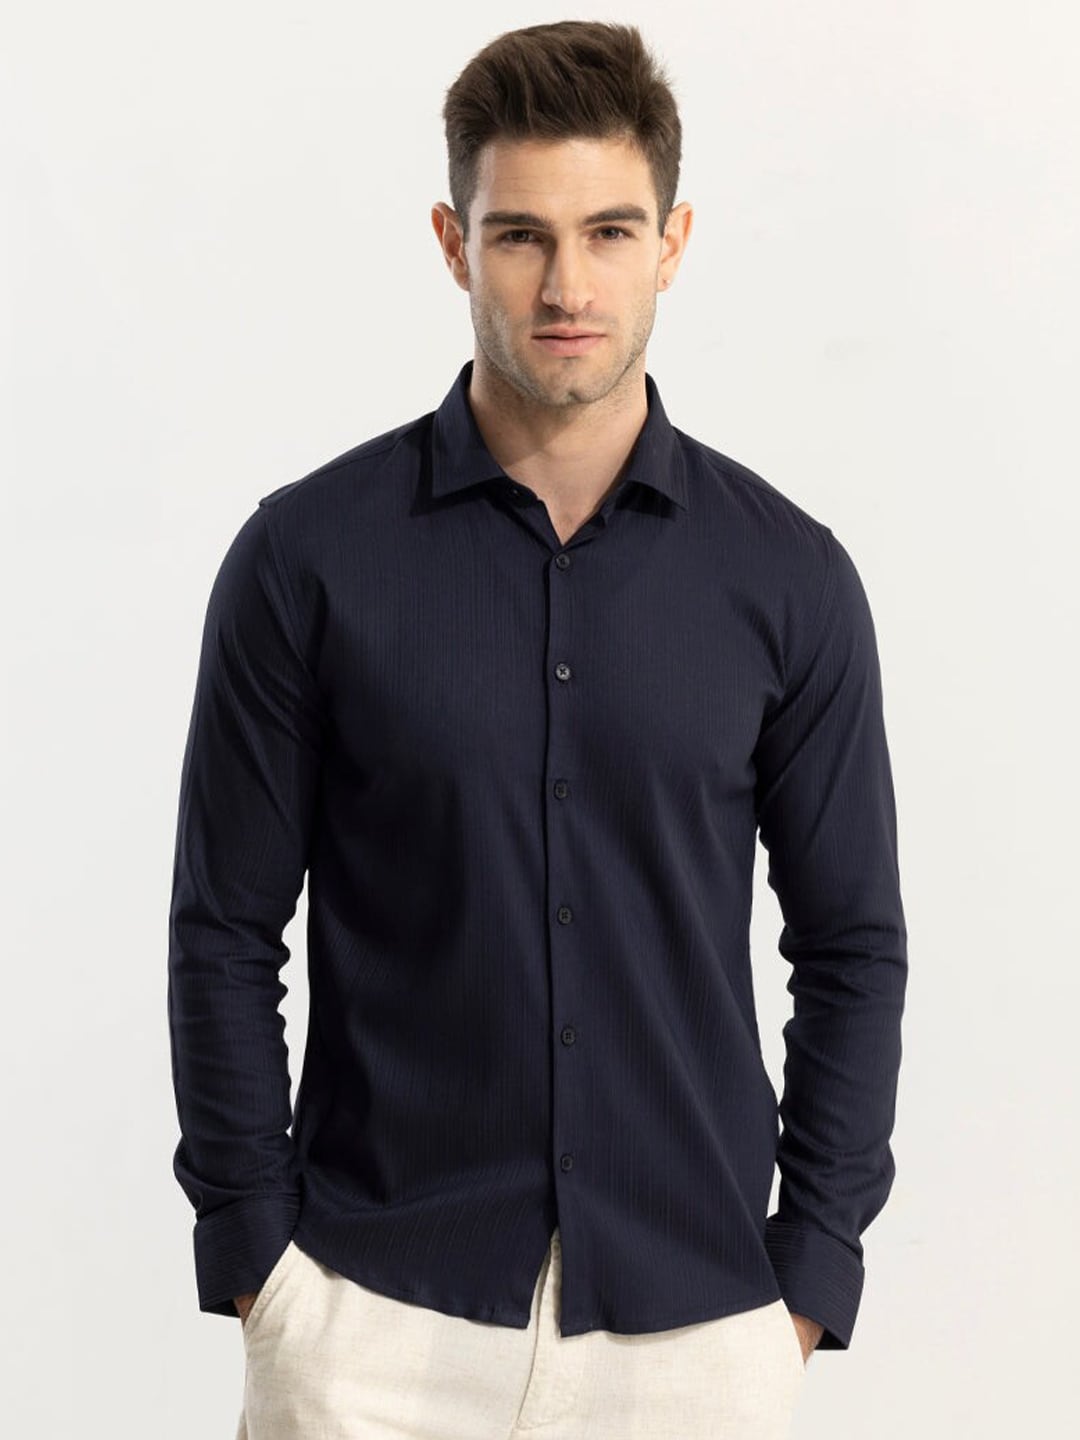 Snitch Navy Blue Classic Slim Fit Long Sleeves Casual Shirt